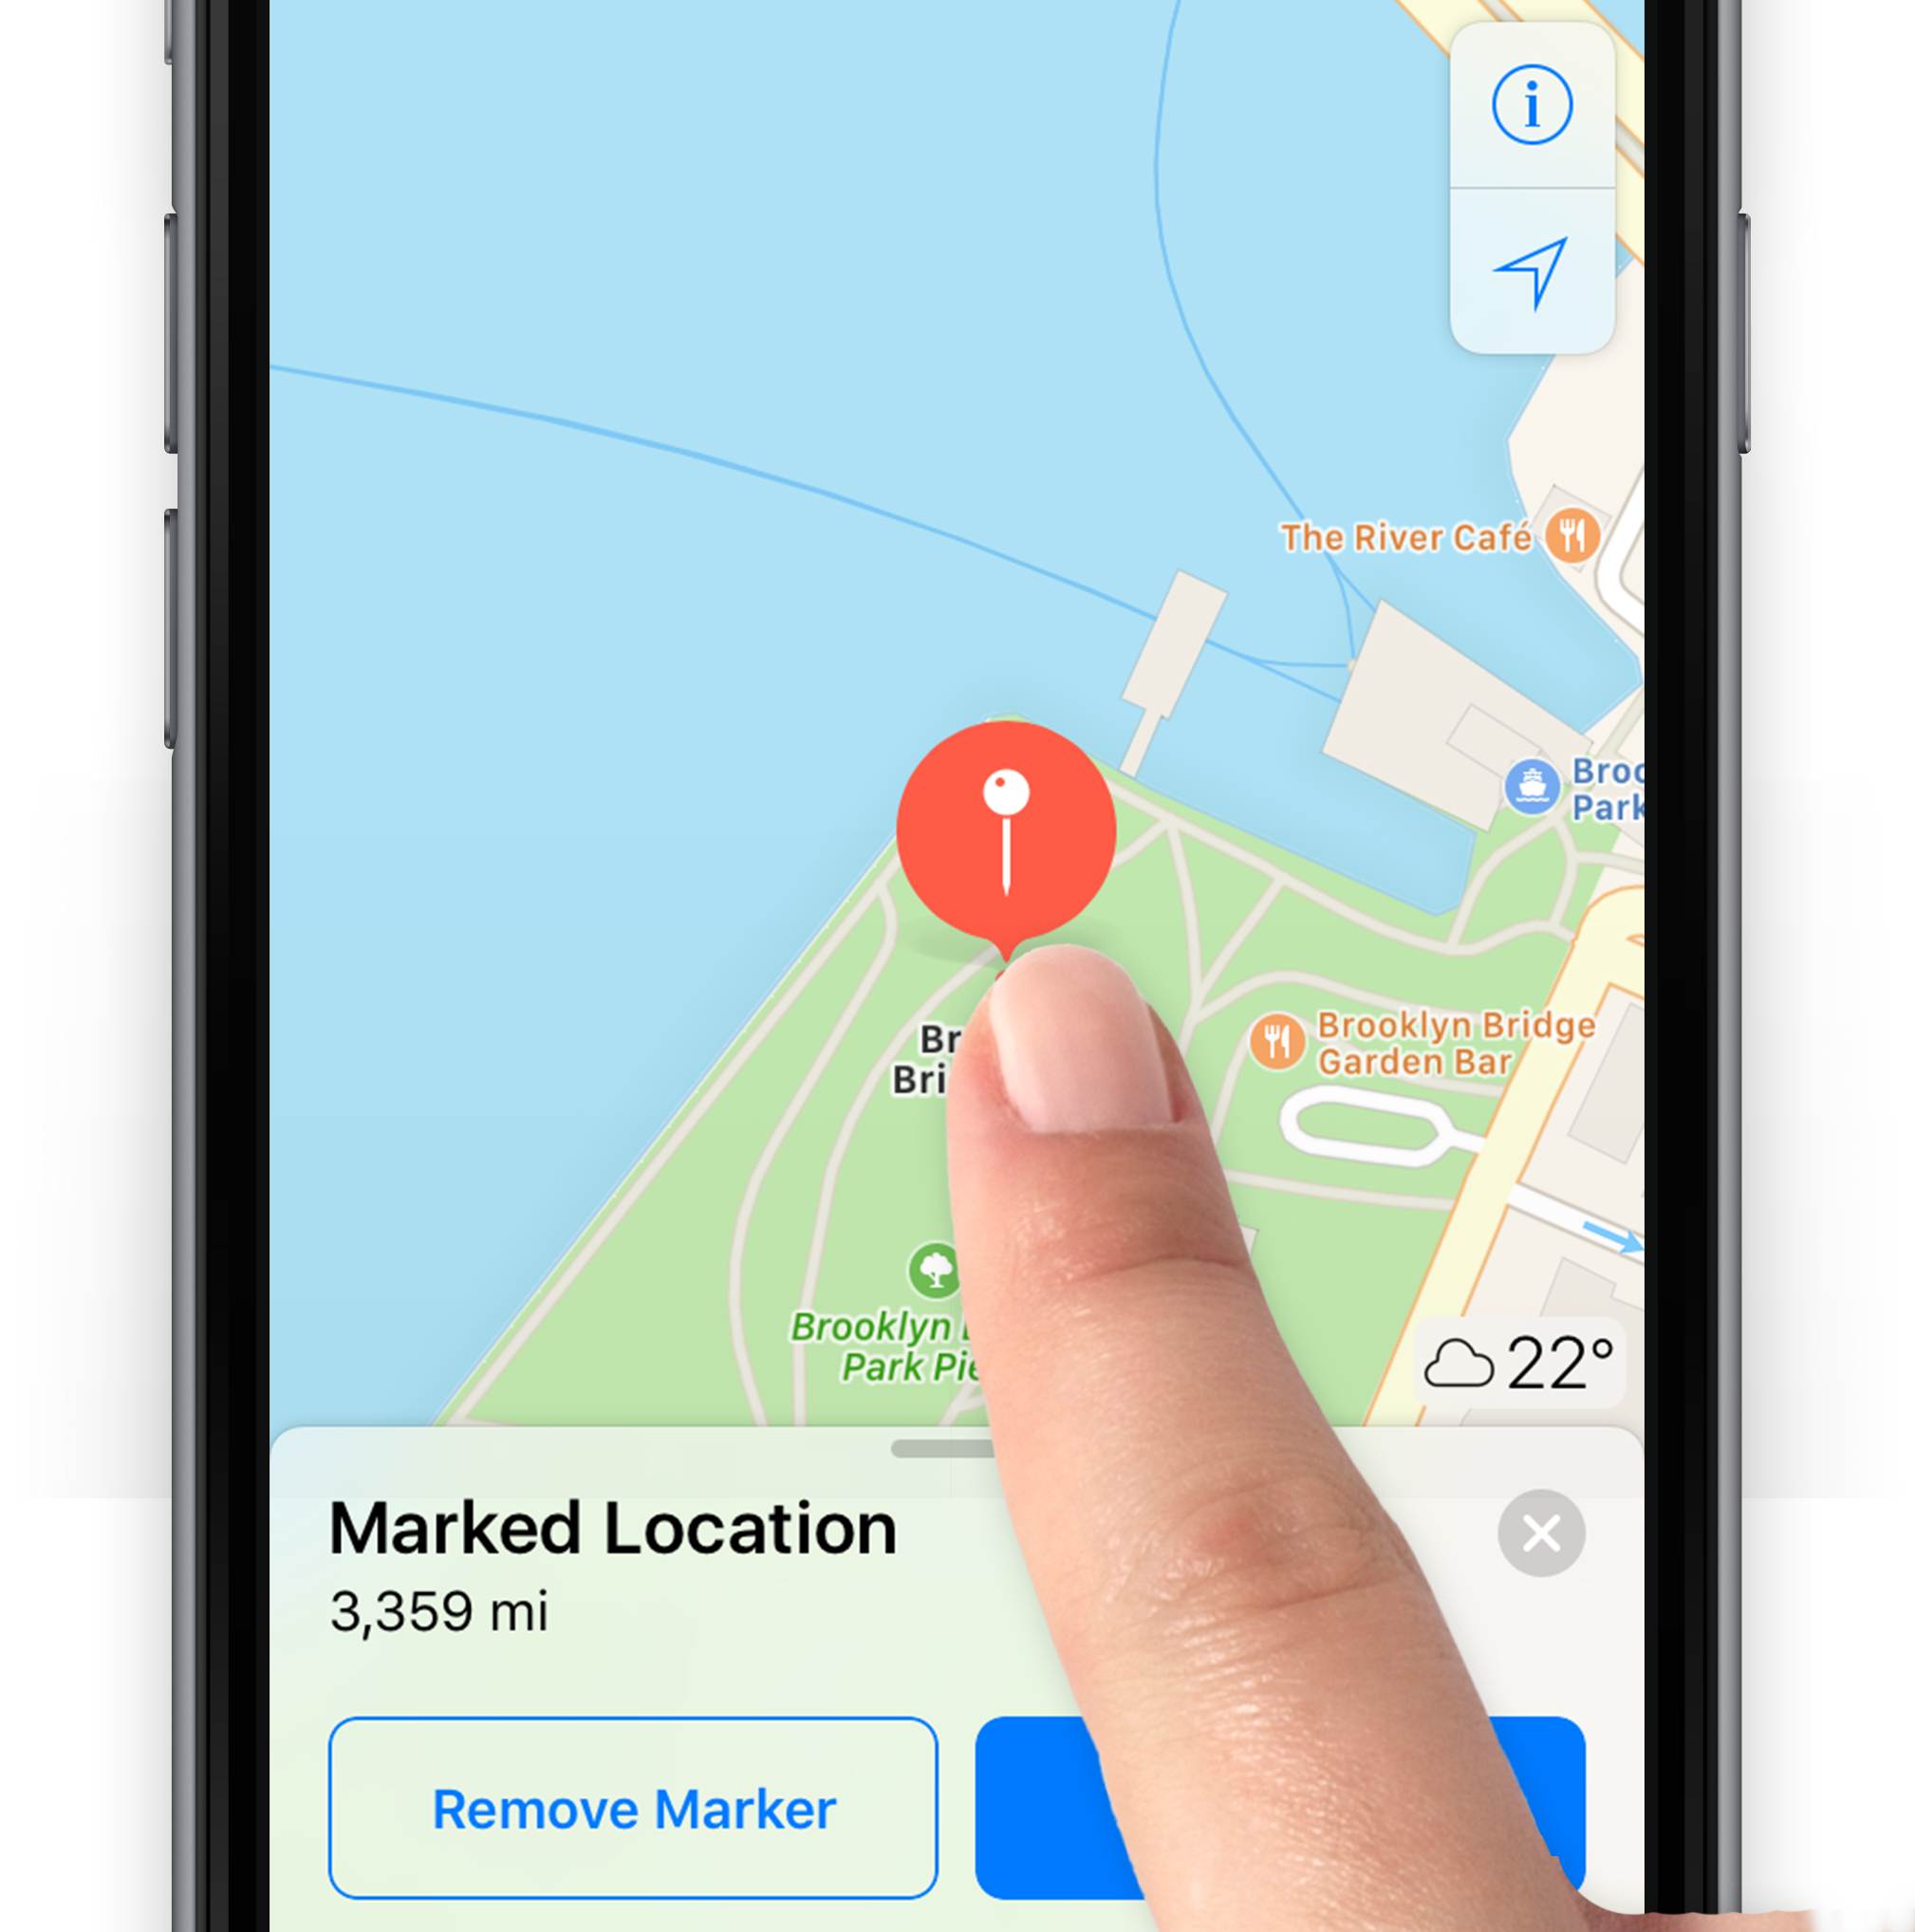 How to Share Your Location on Android: Without Google Account